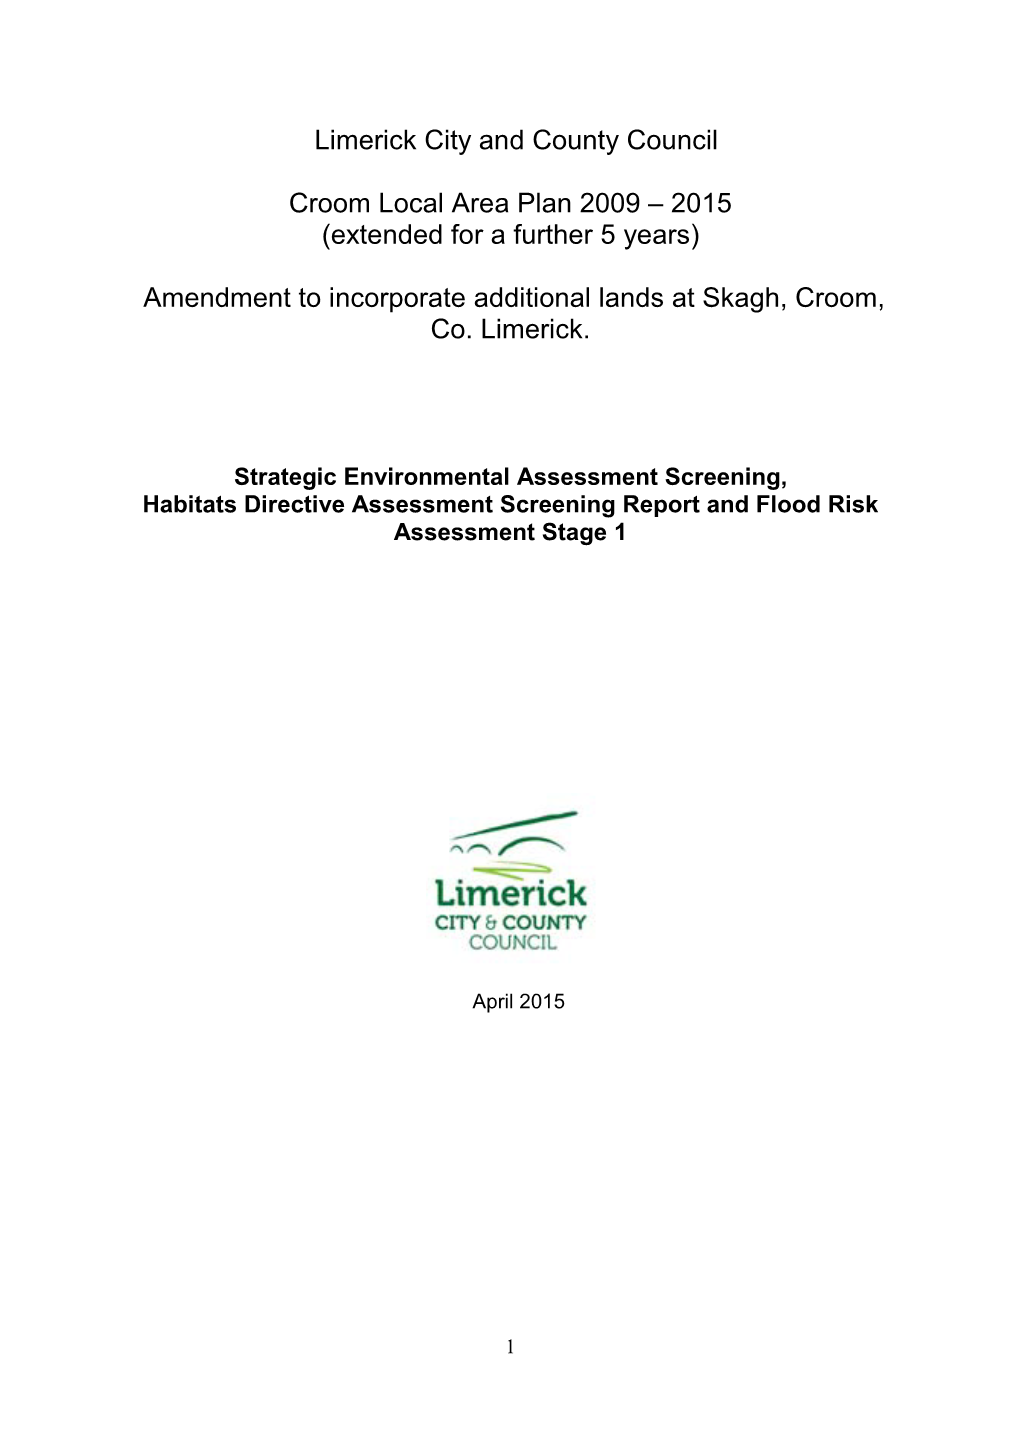 Limerick City and County Council Croom Local Area Plan 2009 – 2015